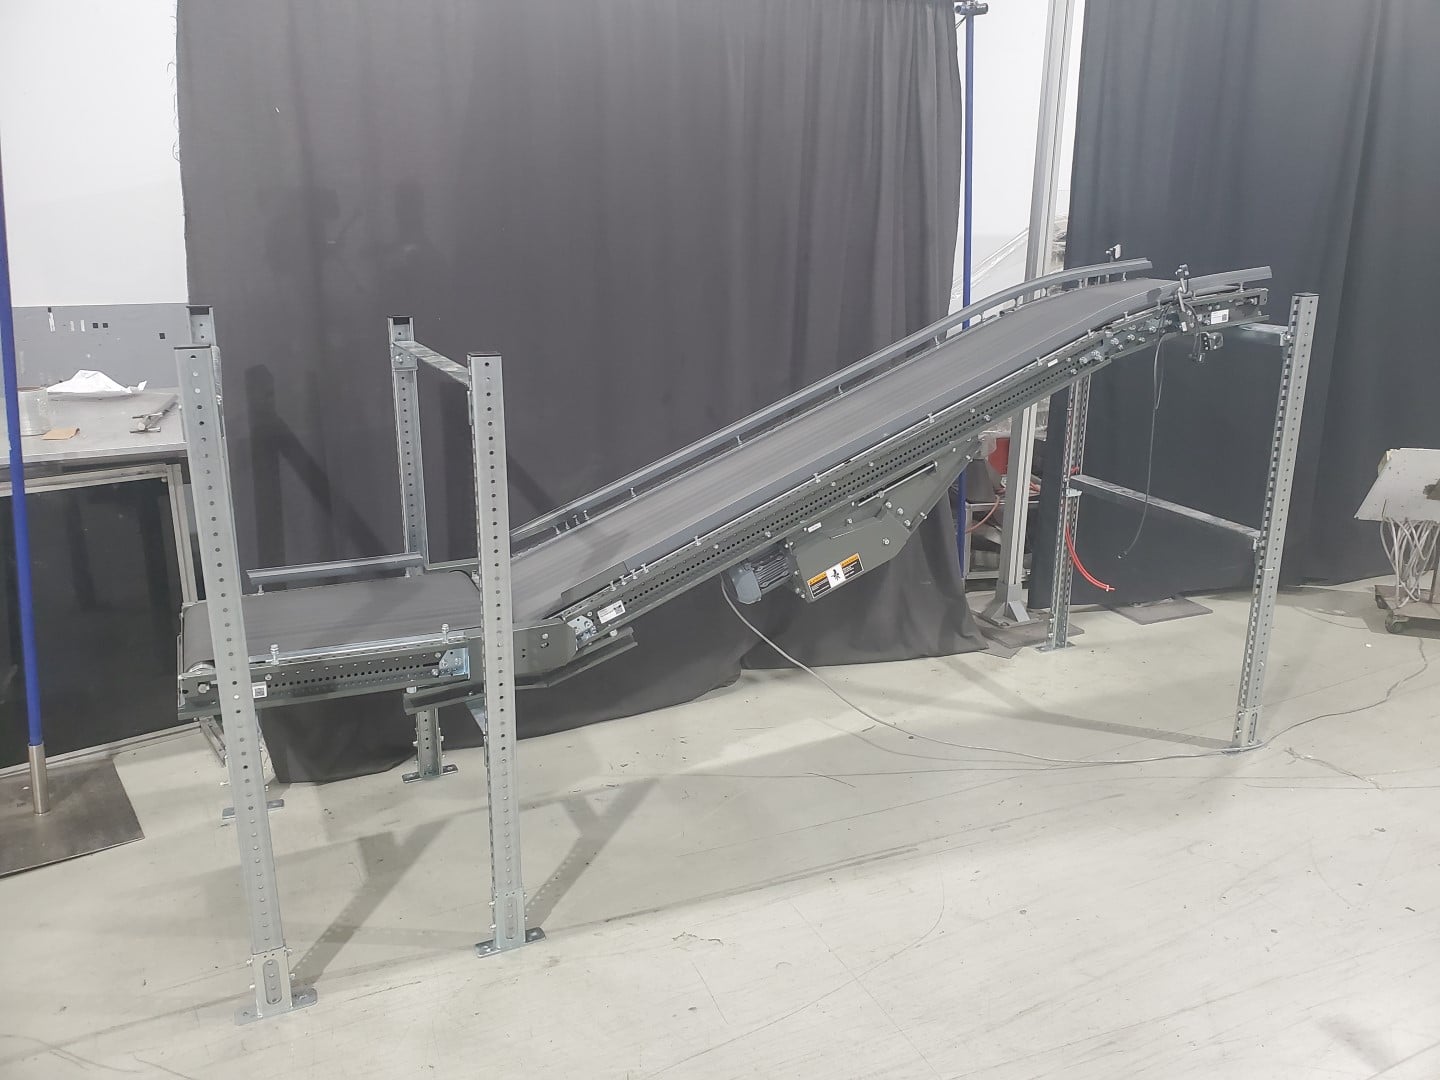 Used Knapp z-shape elevating conveyor for lifting product, LIKE NEW multiple in stock